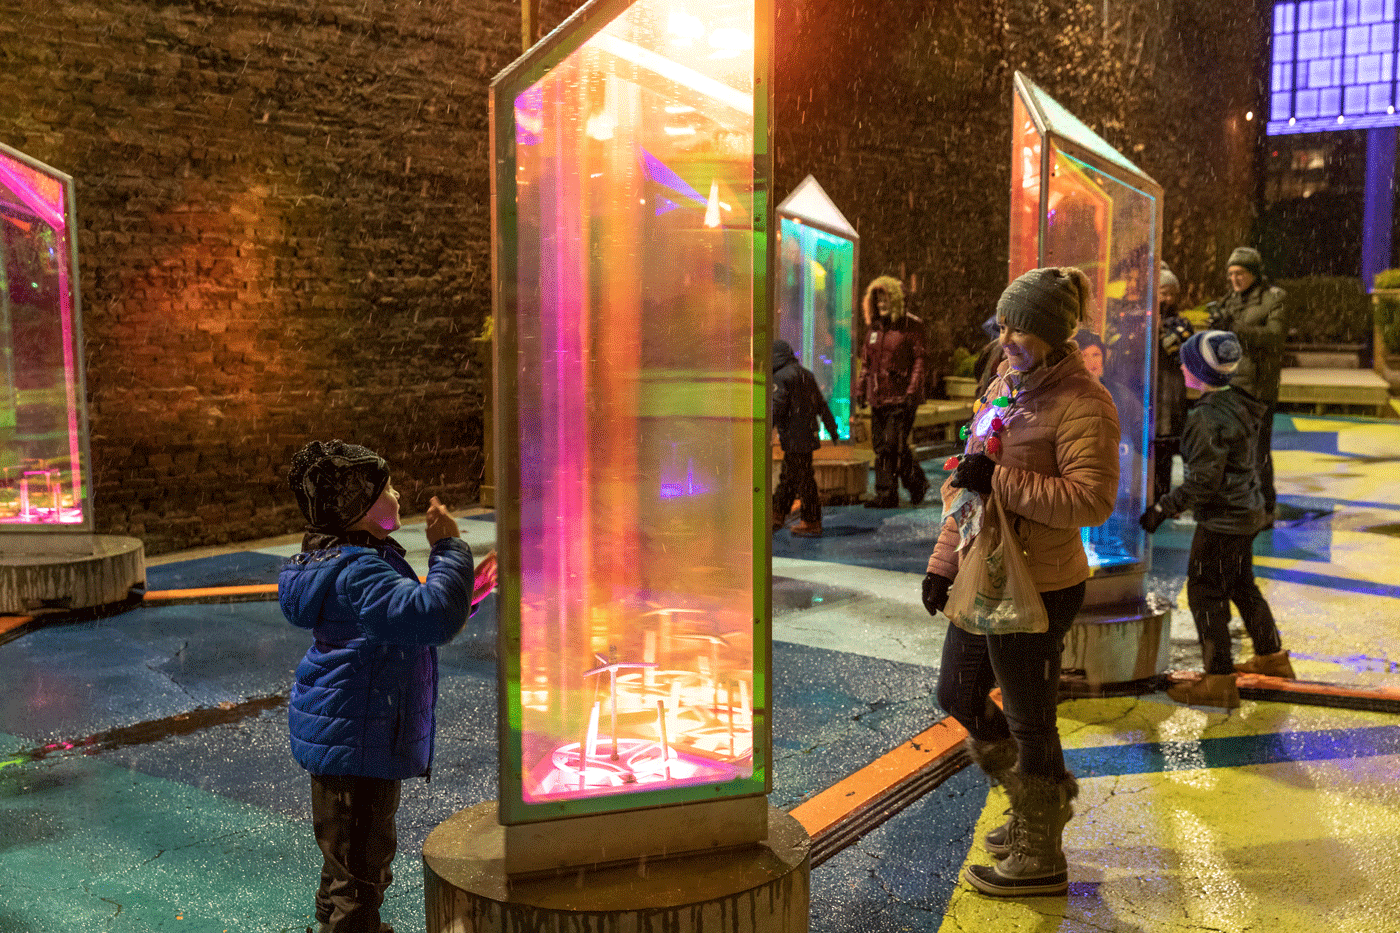 An Adult And A Child Interact With A Colorful Sculpture